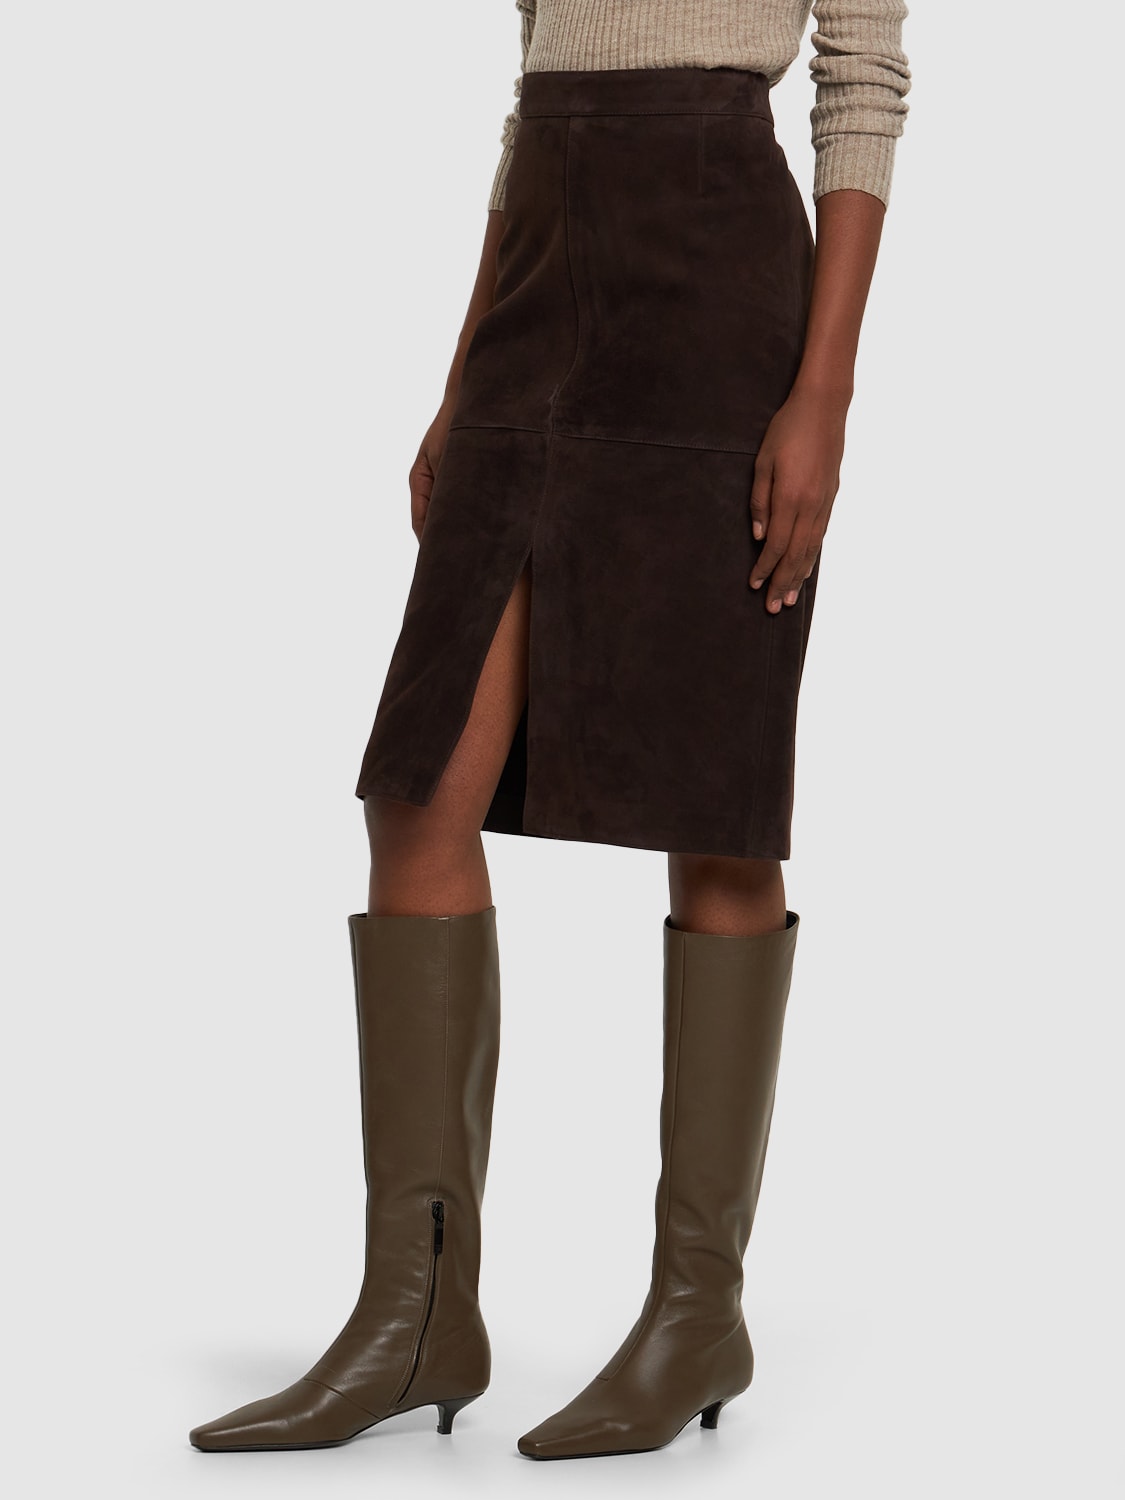 Shop Totême 35mm The Slim Leather & Suede Tall Boots In Taupe